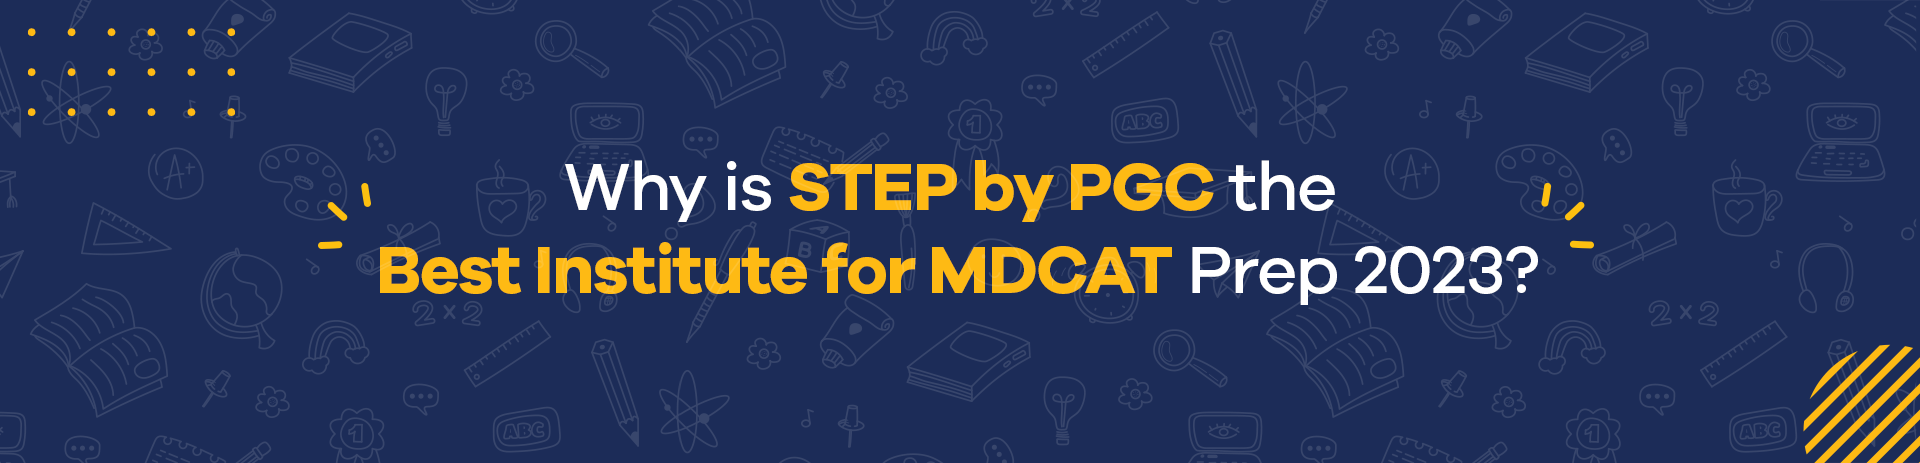 Why is STEP by PGC the Best Institute for MDCAT Prep 2023?